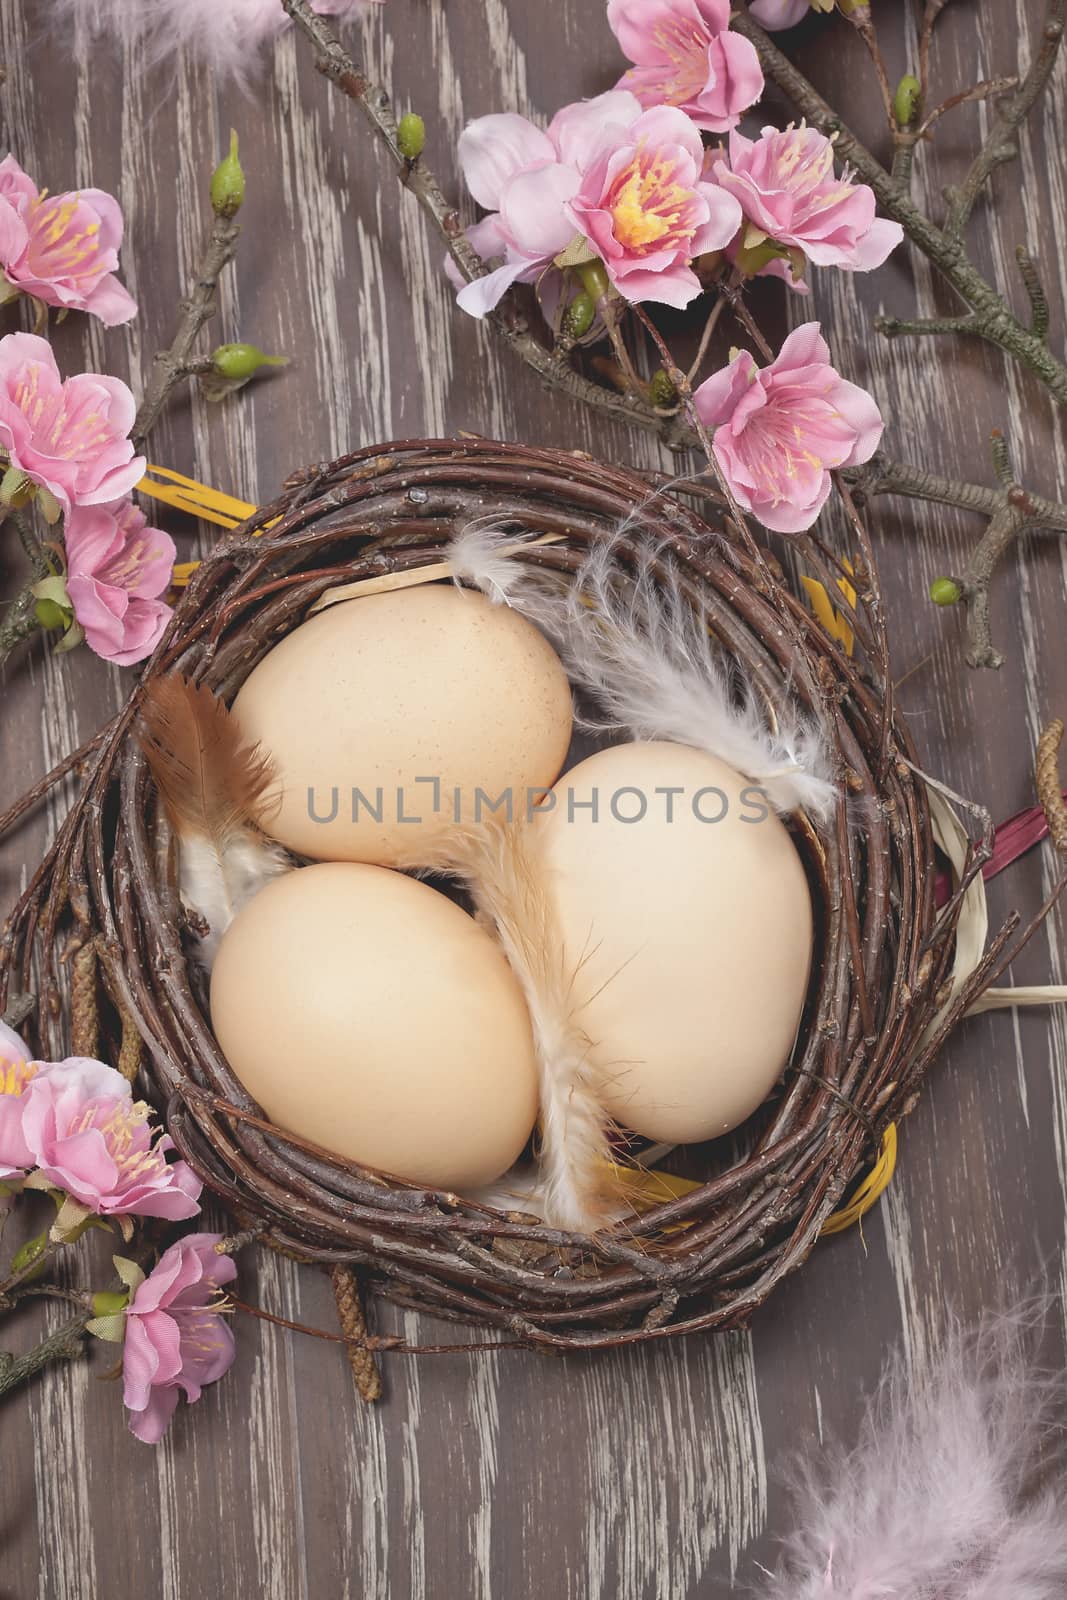 Eggs in a spring blossom nest by Slast20